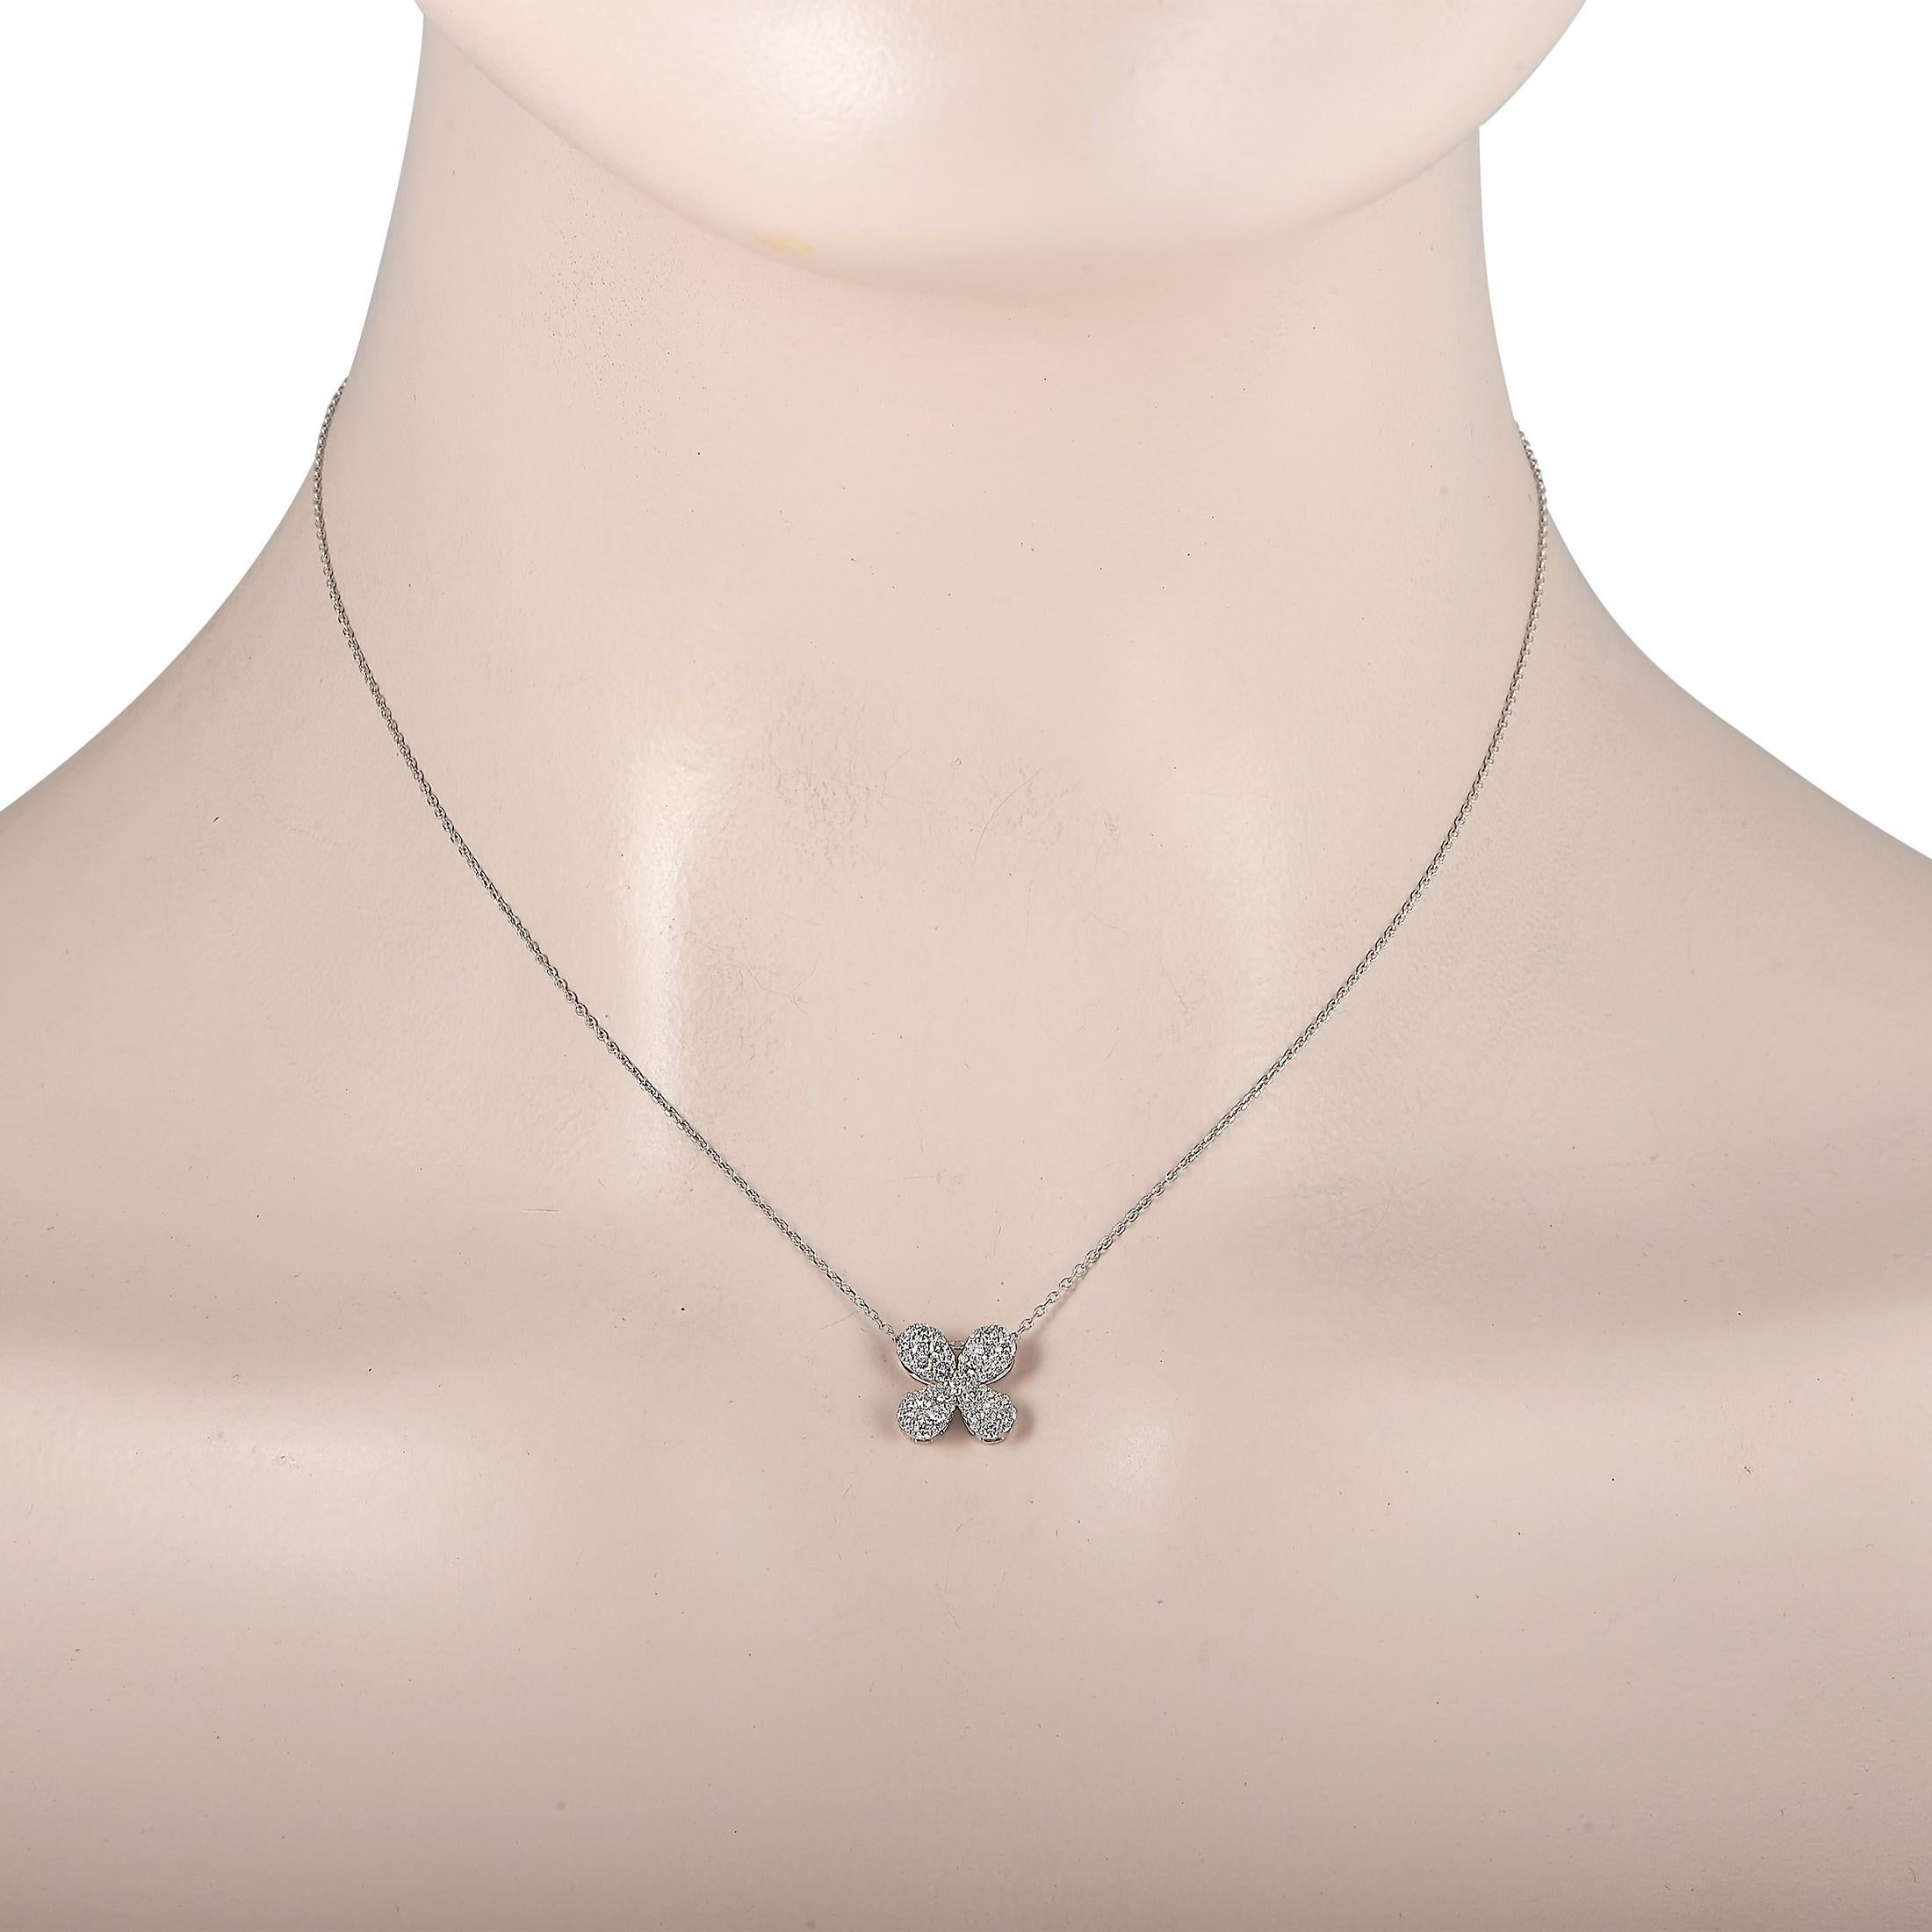 This dazzling LB Exclusive necklace is made with an 18K white gold chain, highlighting a beautiful 18K white gold pendant set with 0.50 carats of round diamonds. The diamonds. The 18K white gold chain measures 15 inches in length and features a